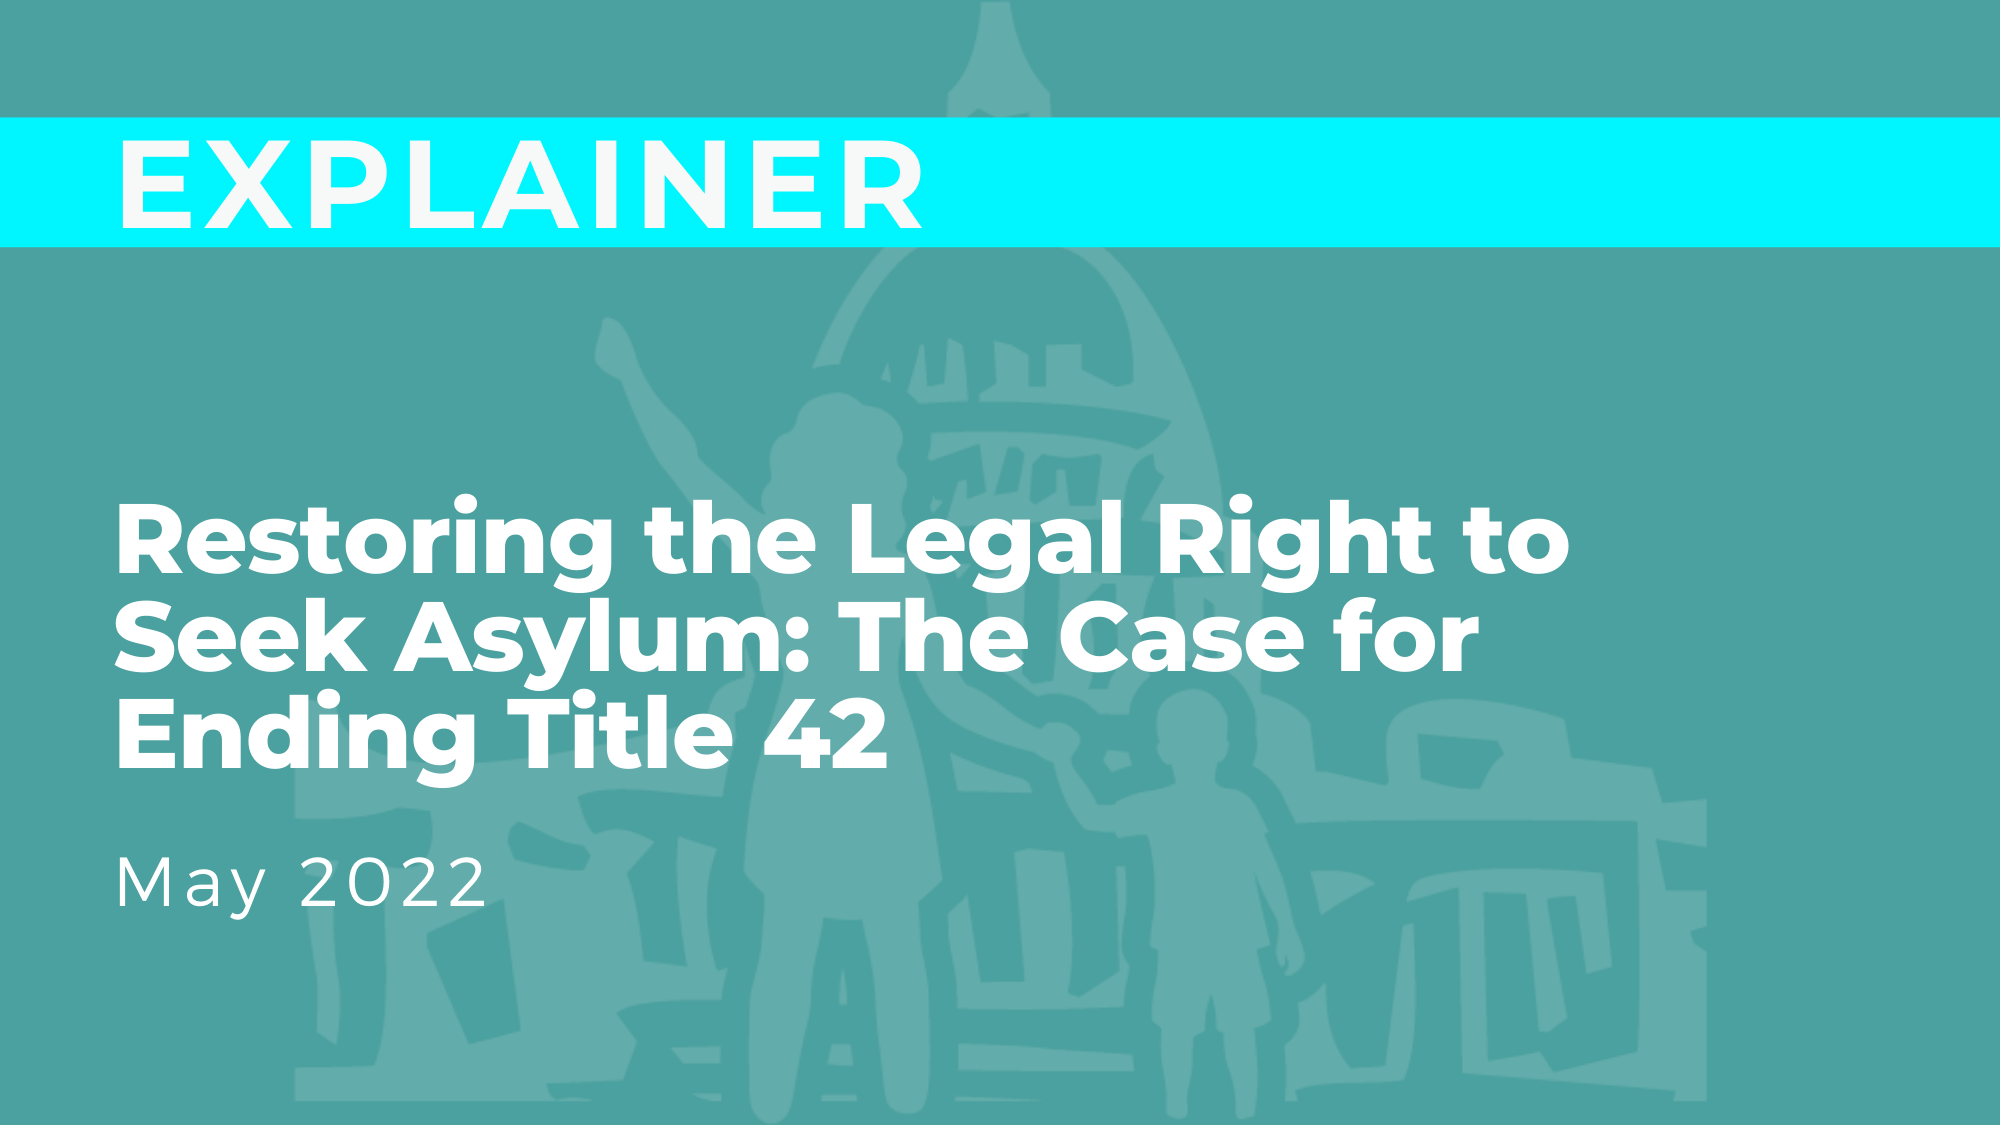 Restoring the Legal Right to Seek Asylum: The Case for Ending Title 42